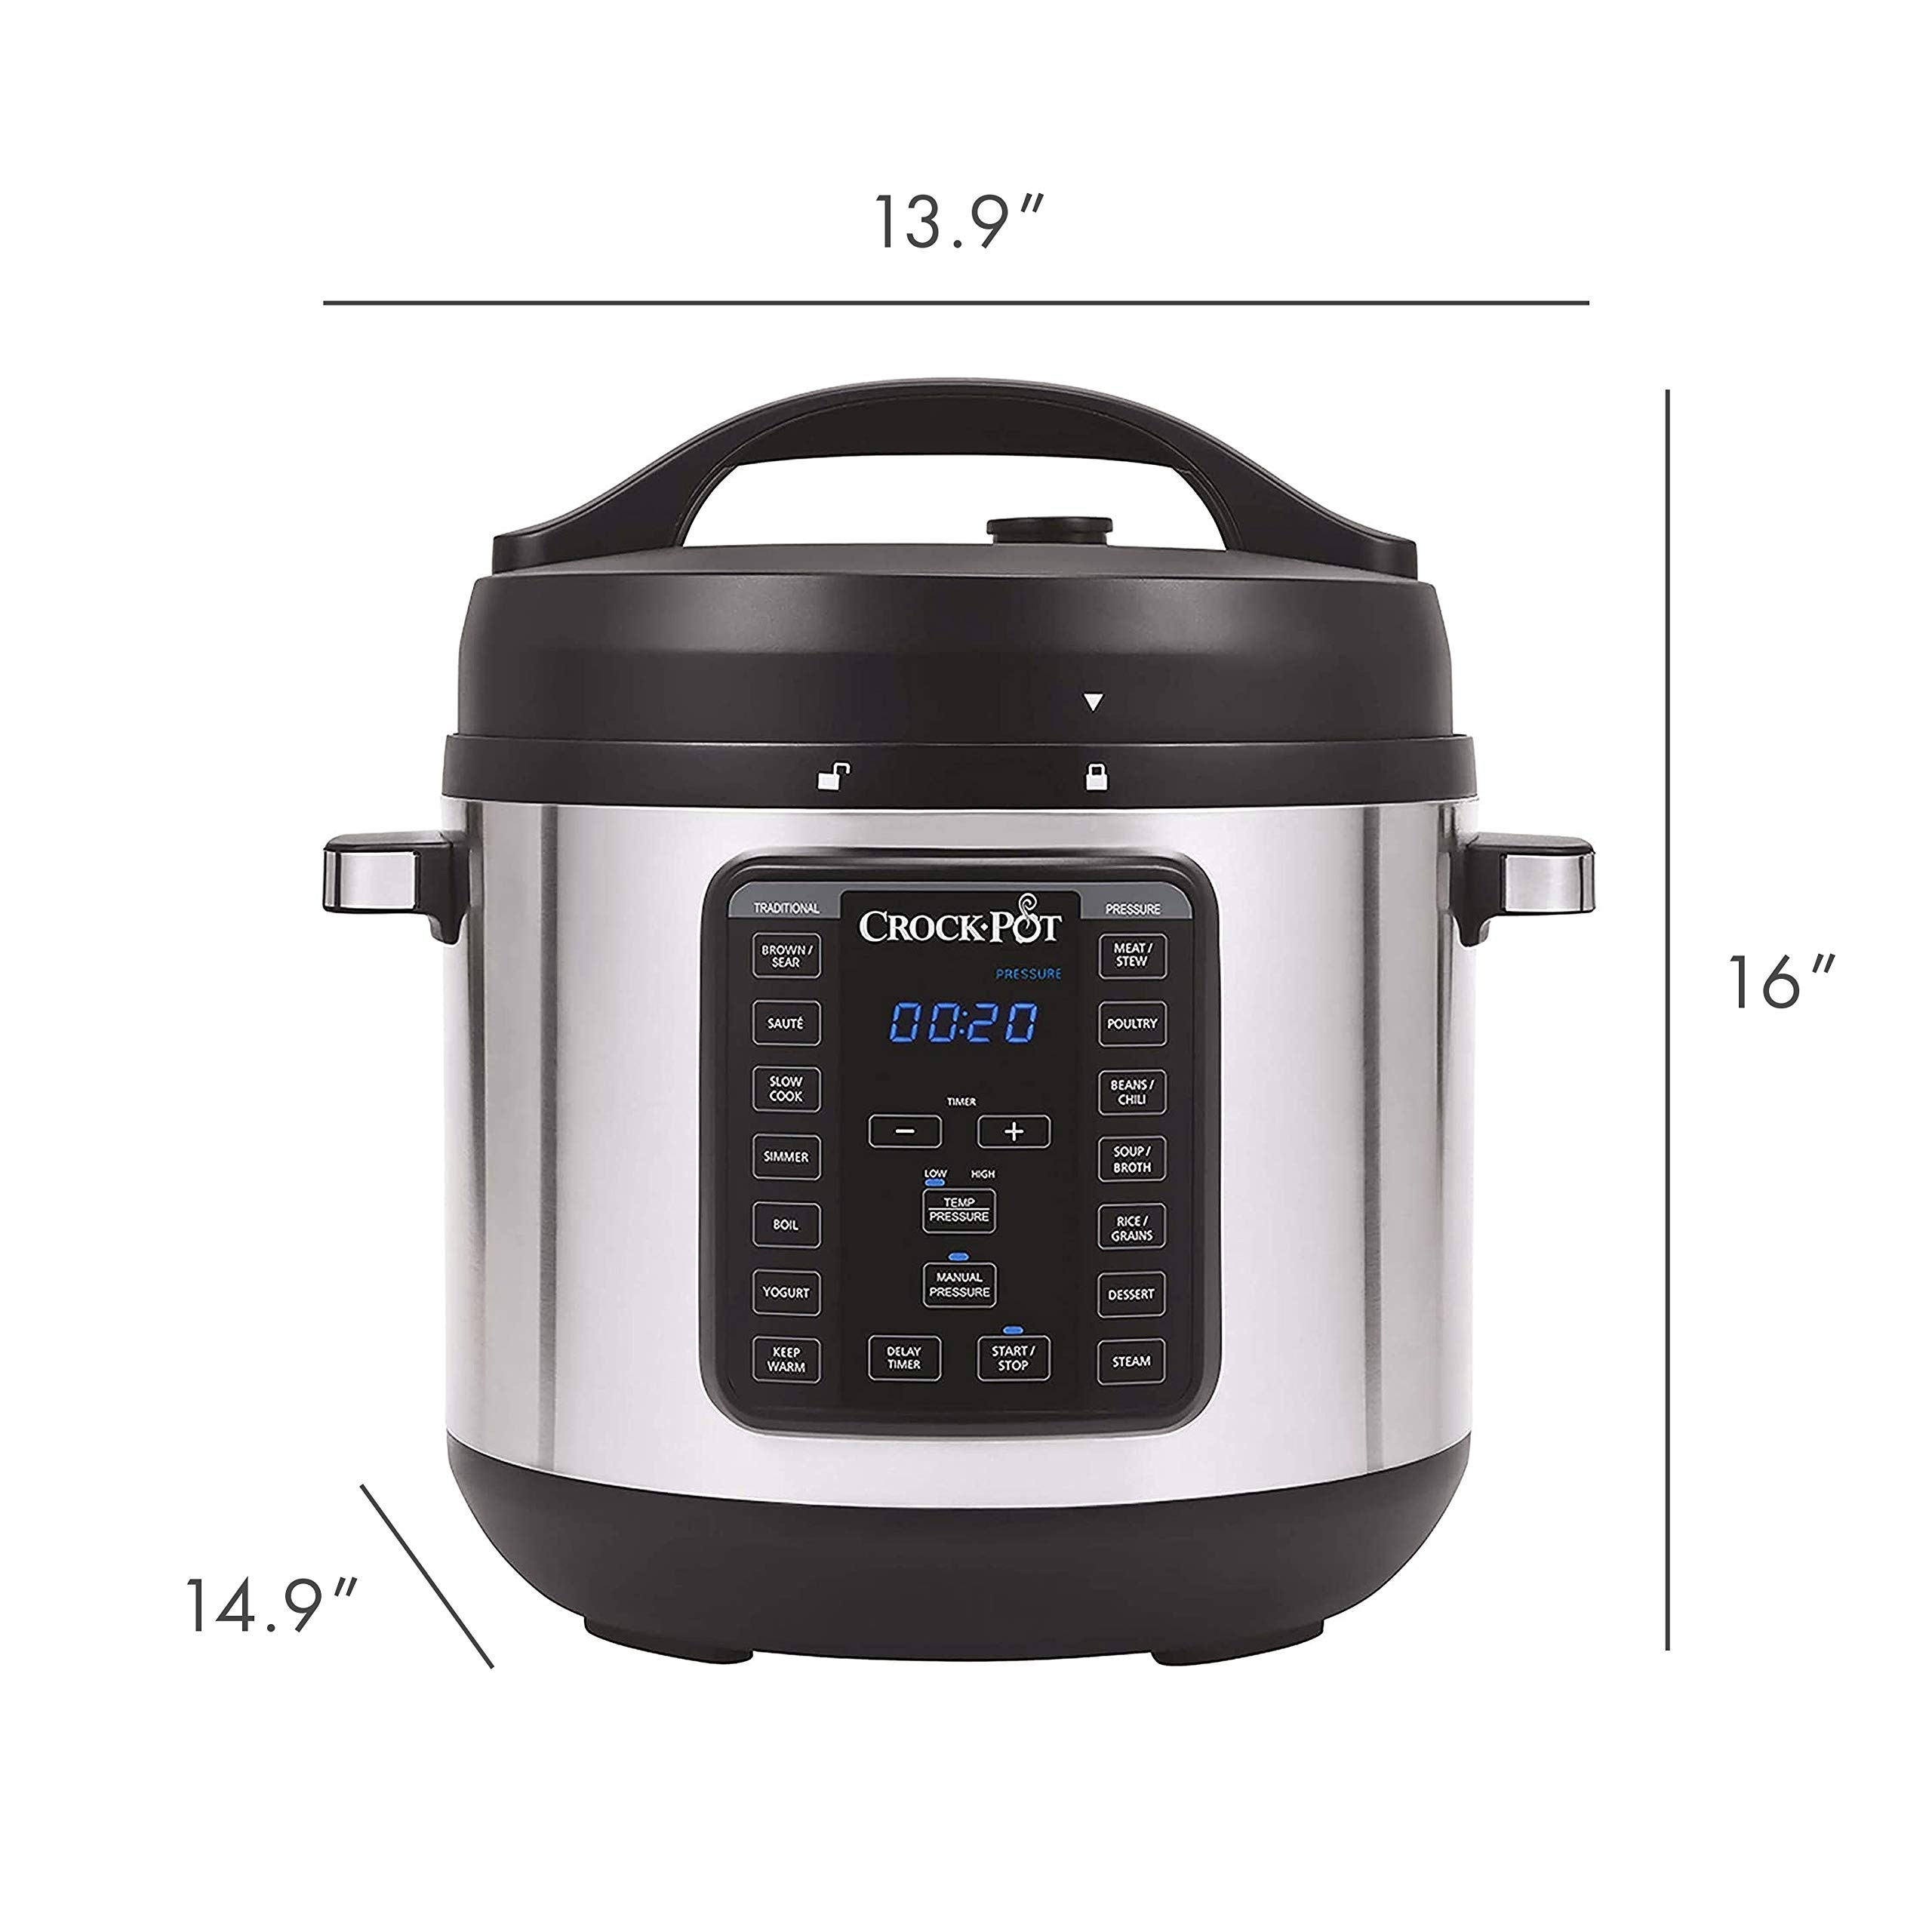 https://ak1.ostkcdn.com/images/products/is/images/direct/0e8c84e9dfa73d2db886fe7c111435ba169cd6d9/8-Quart-Multi-Use-XL-Express-Crock-Programmable-Slow-Cooker-and-Pressure-Cooker-with-Manual-Pressure%2C-Stainless-Steel.jpg